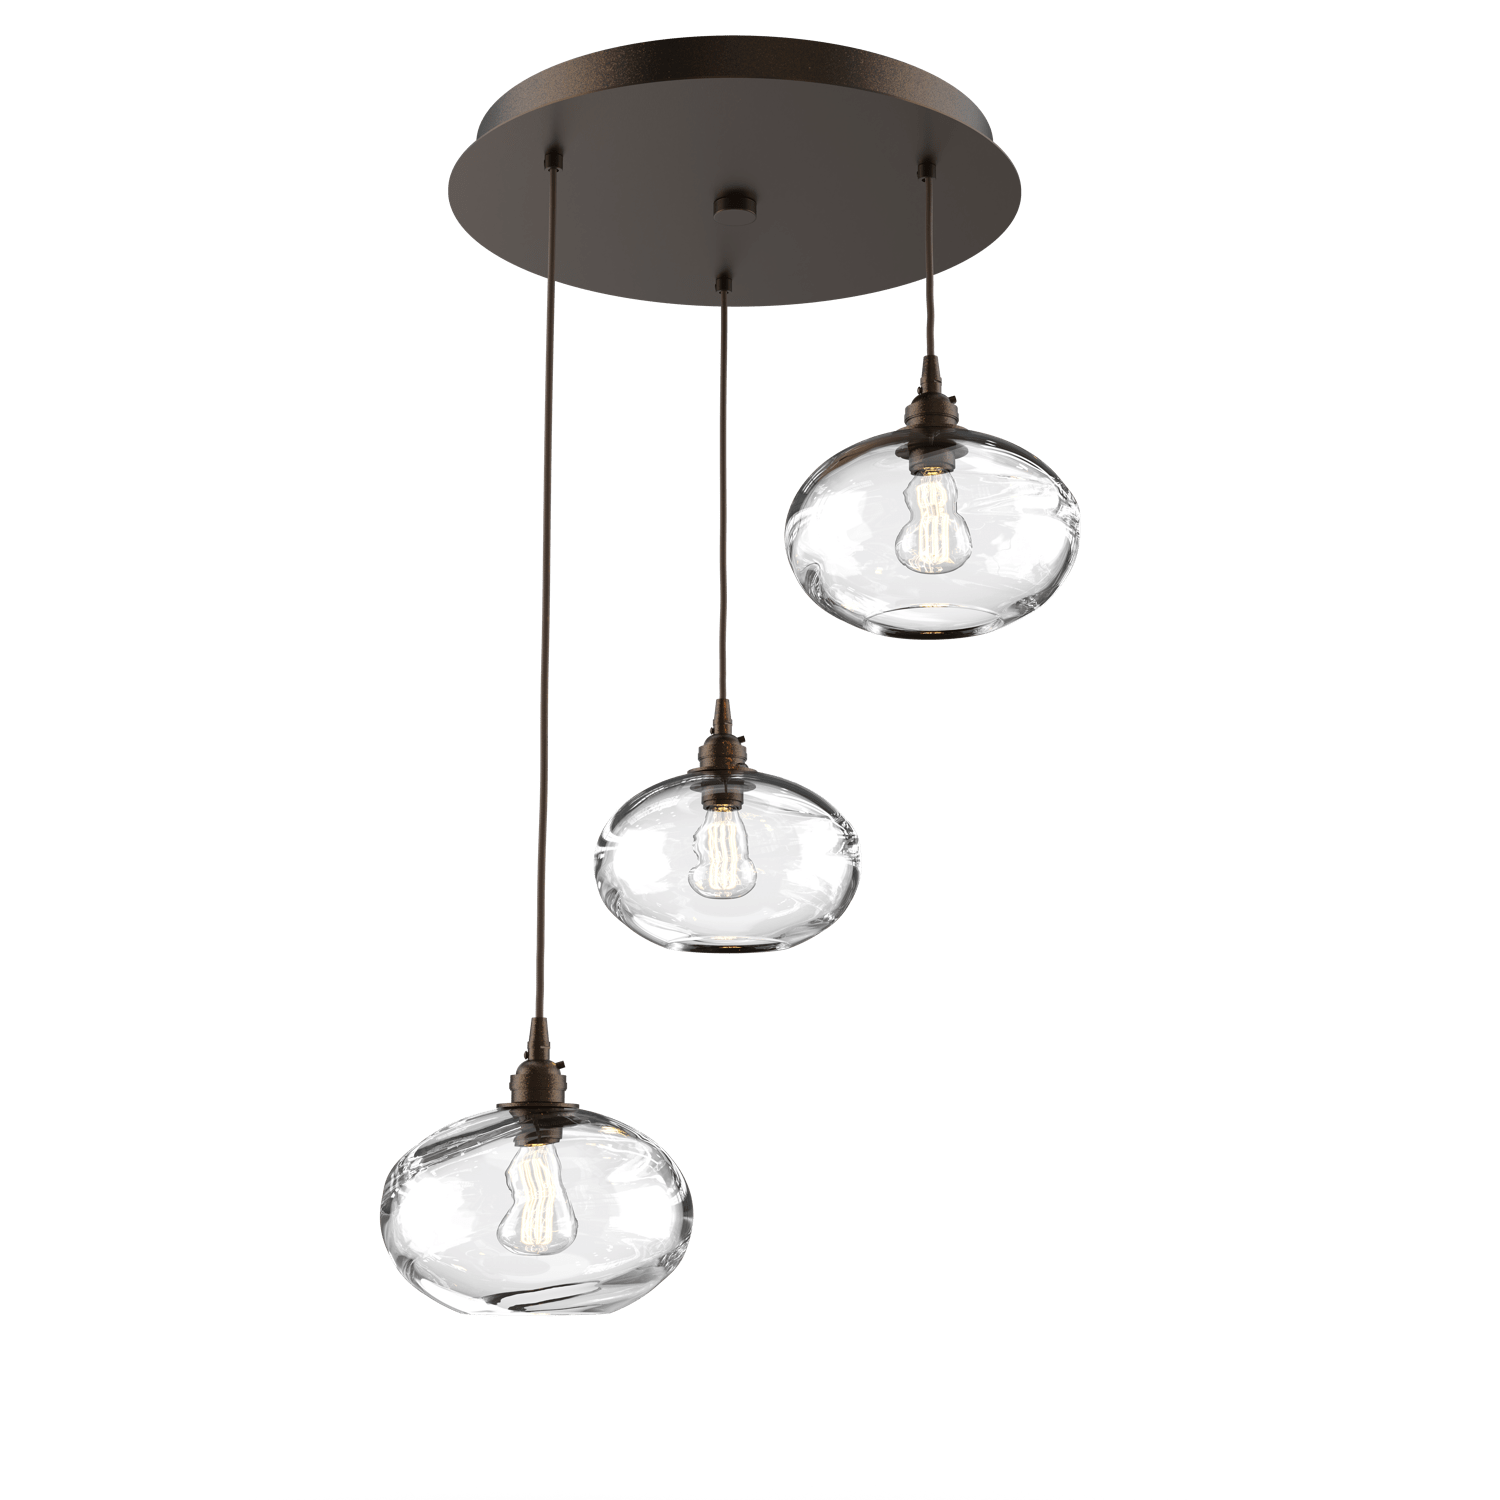 CHB0036-03-FB-OC-Hammerton-Studio-Optic-Blown-Glass-Coppa-3-light-round-pendant-chandelier-with-flat-bronze-finish-and-optic-clear-blown-glass-shades-and-incandescent-lamping